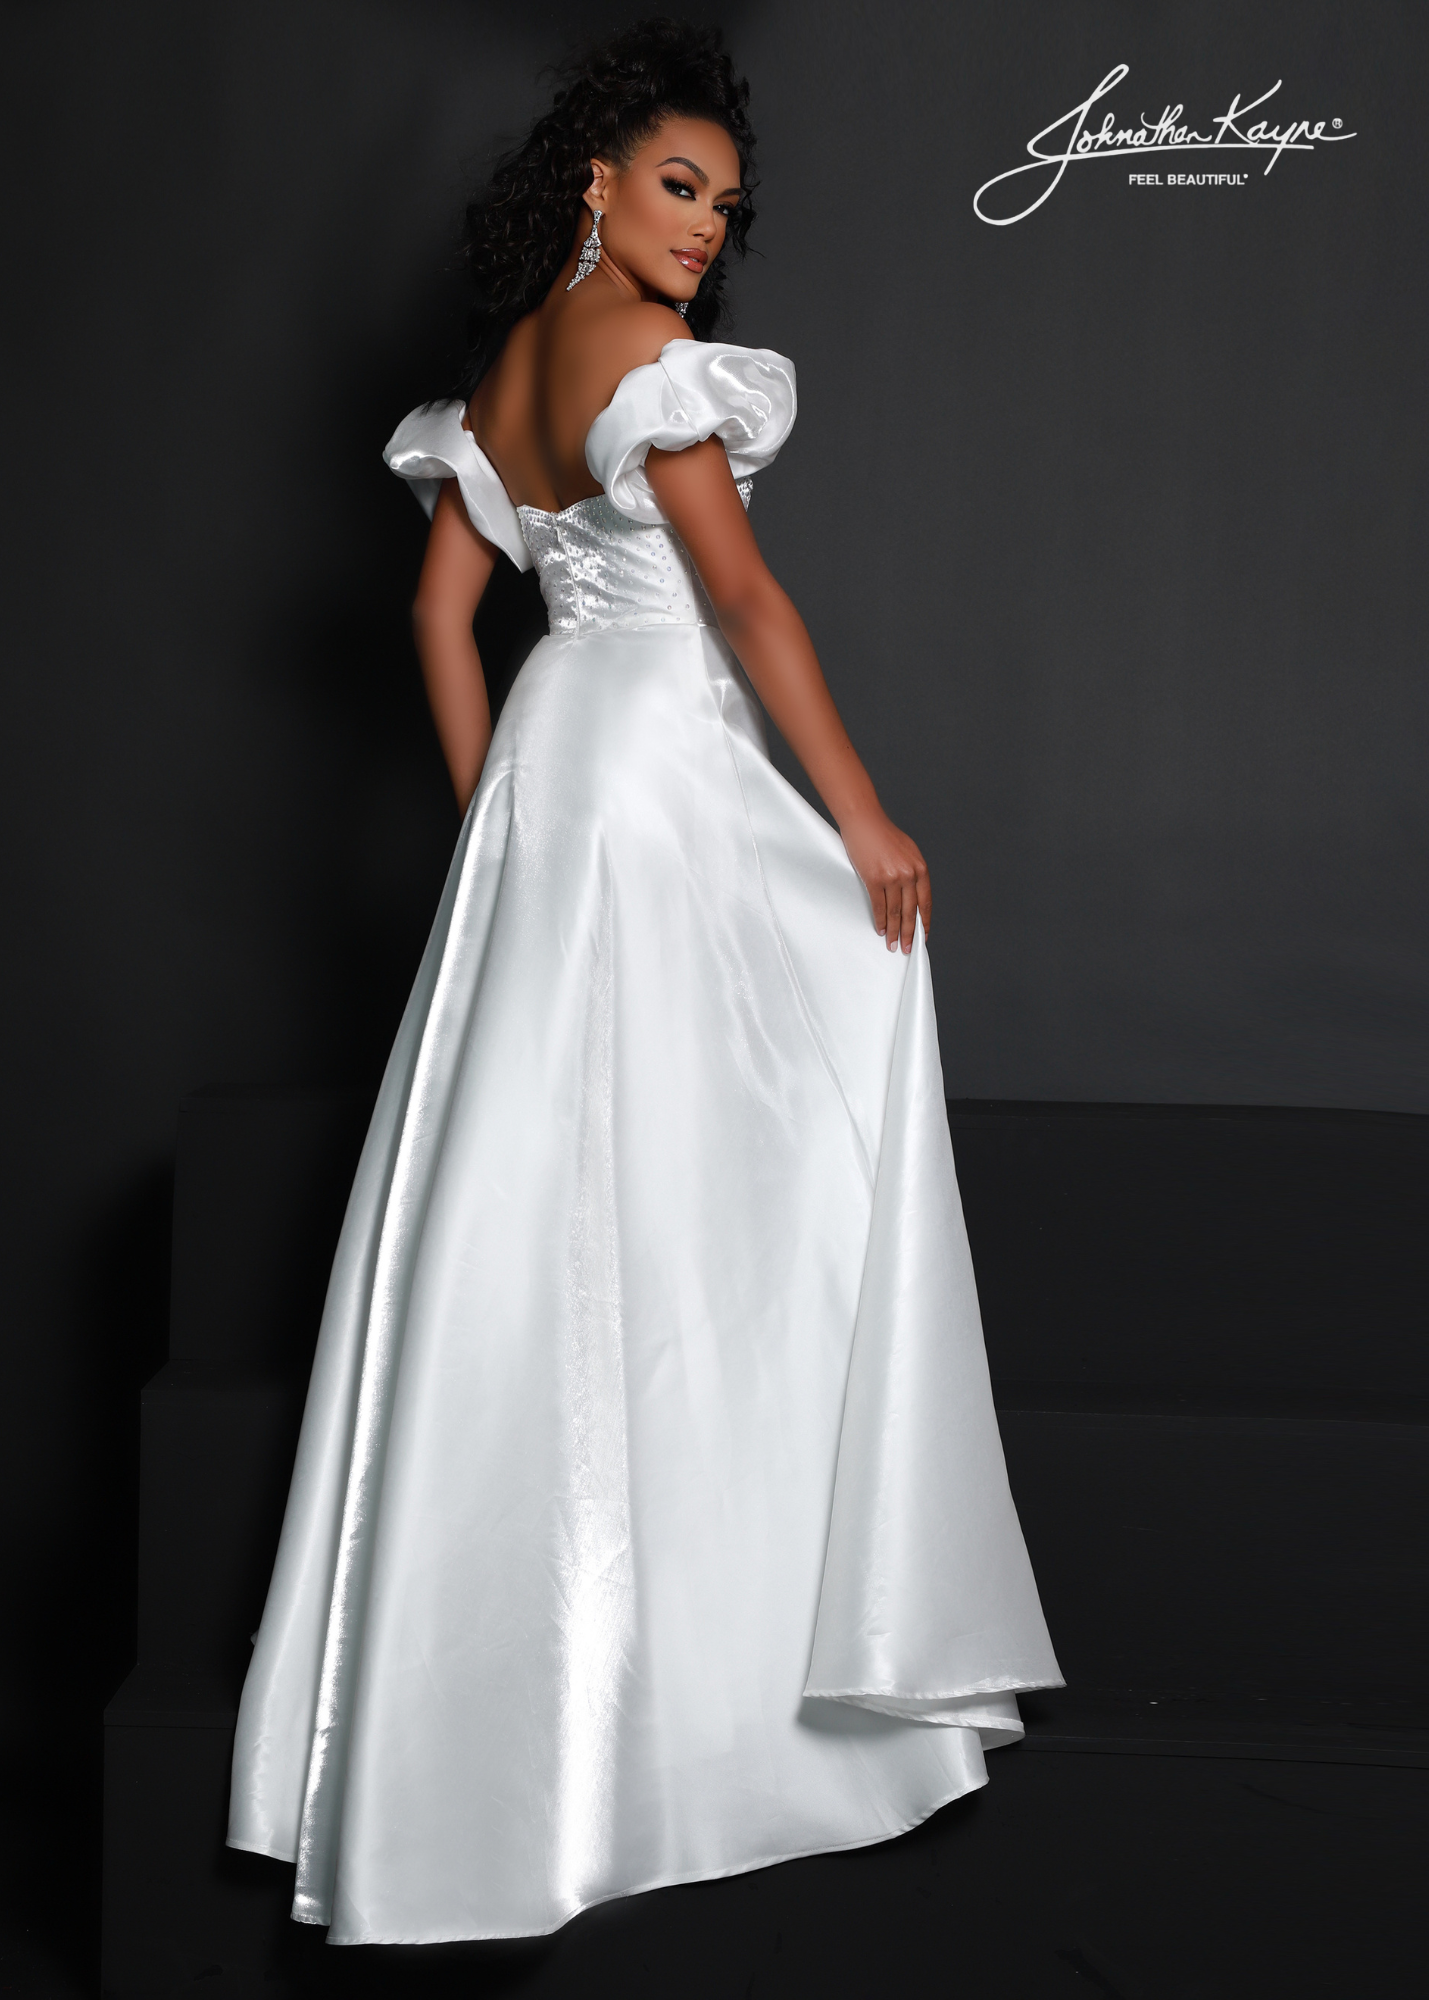 Make a statement in this Johnathan Kayne 2642 dress! Made of luxurious White Shimmer satin, its A-line silhouette and puff sleeves will have you looking fabulous for any formal occasion. With a high slit for extra pizzazz, you won't be able to resist this elegant maxi dress! Shake things up in style! Show off your style and sophistication in this beautiful shimmer satin A-line gown with removeable puff sleeves at any event  Size: 2  Color: White